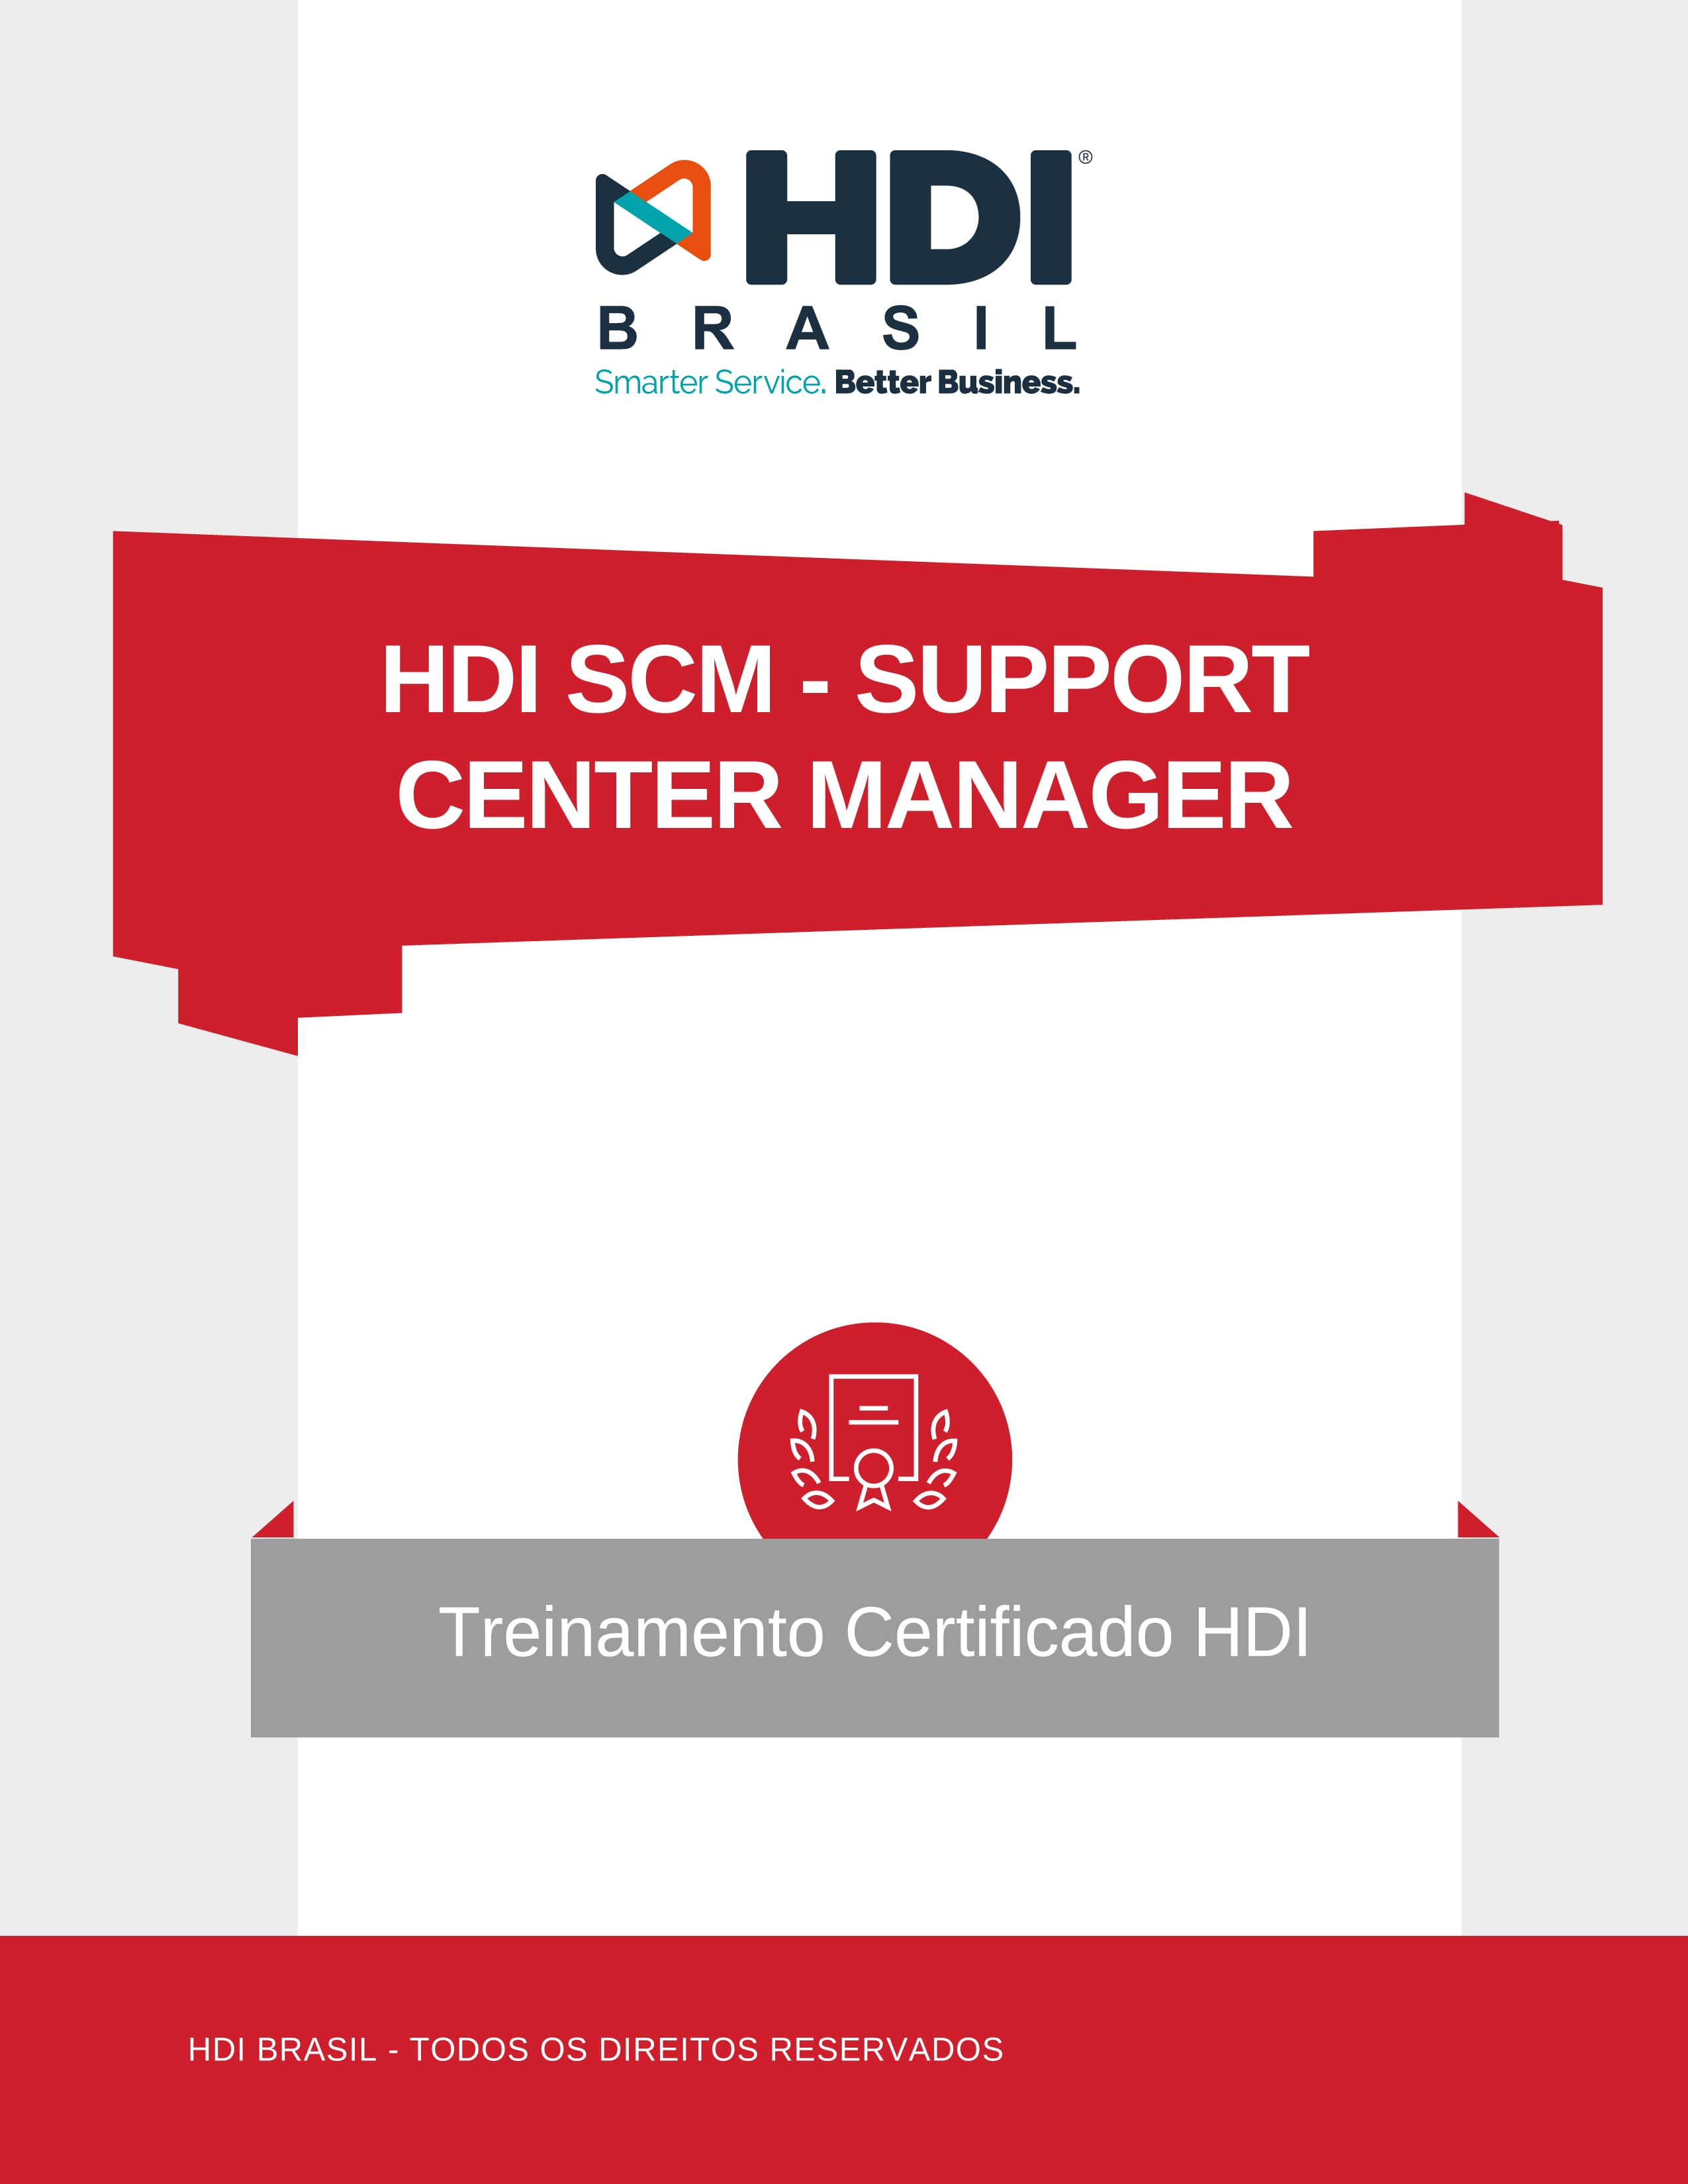 HDI SCM - SUPPORT CENTER MANAGER